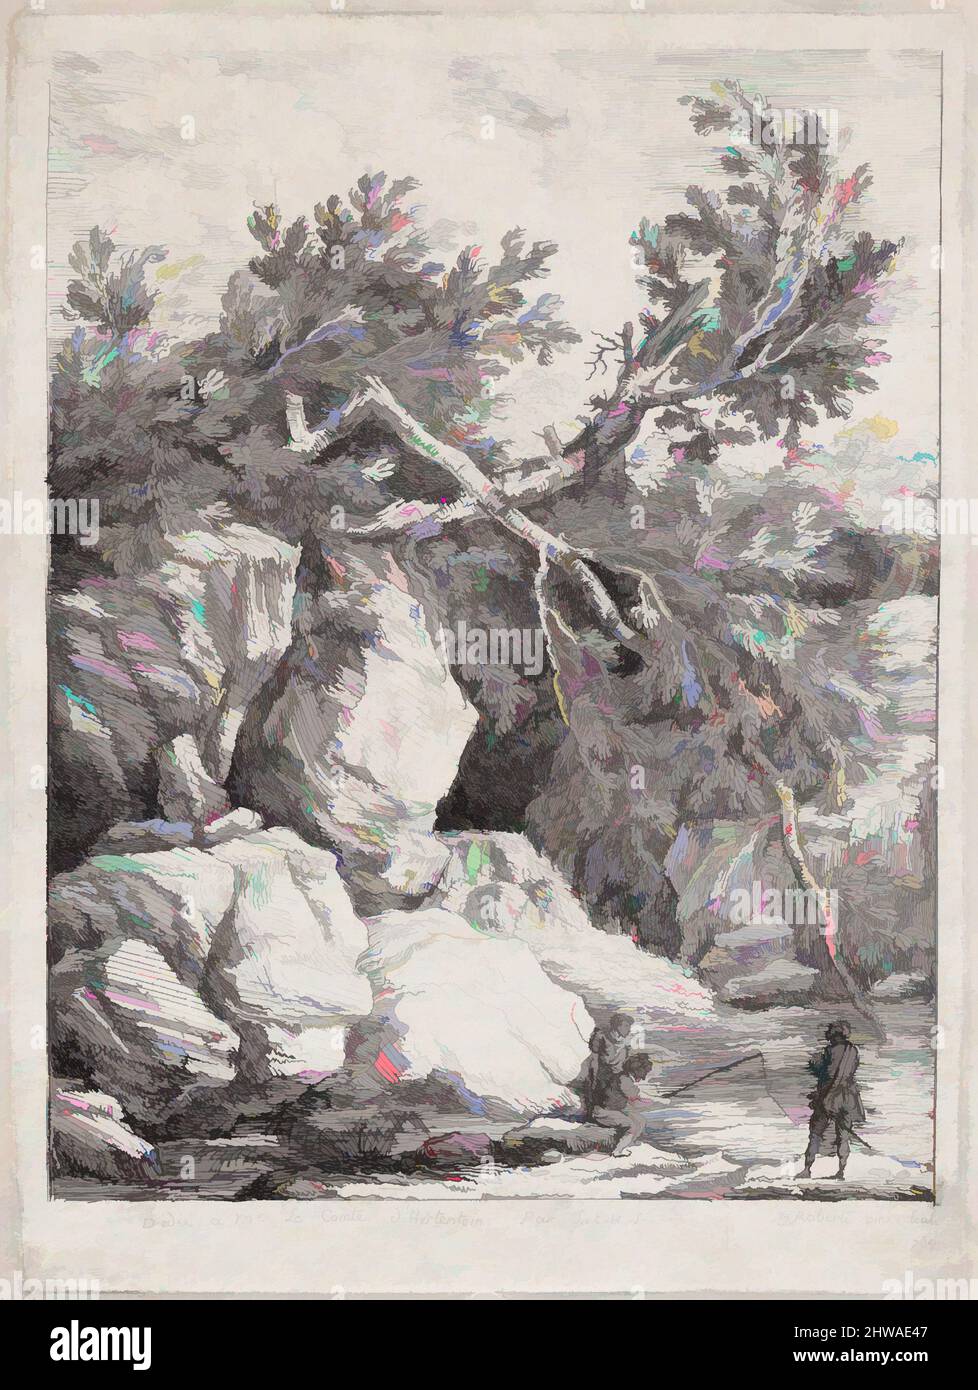 Art inspired by Drawings and Prints, Print, Landscape with a Fallen Tree, Artist, Hubert Robert, French, Paris 1733–1808 Paris, Robert, Hubert, Classic works modernized by Artotop with a splash of modernity. Shapes, color and value, eye-catching visual impact on art. Emotions through freedom of artworks in a contemporary way. A timeless message pursuing a wildly creative new direction. Artists turning to the digital medium and creating the Artotop NFT Stock Photo